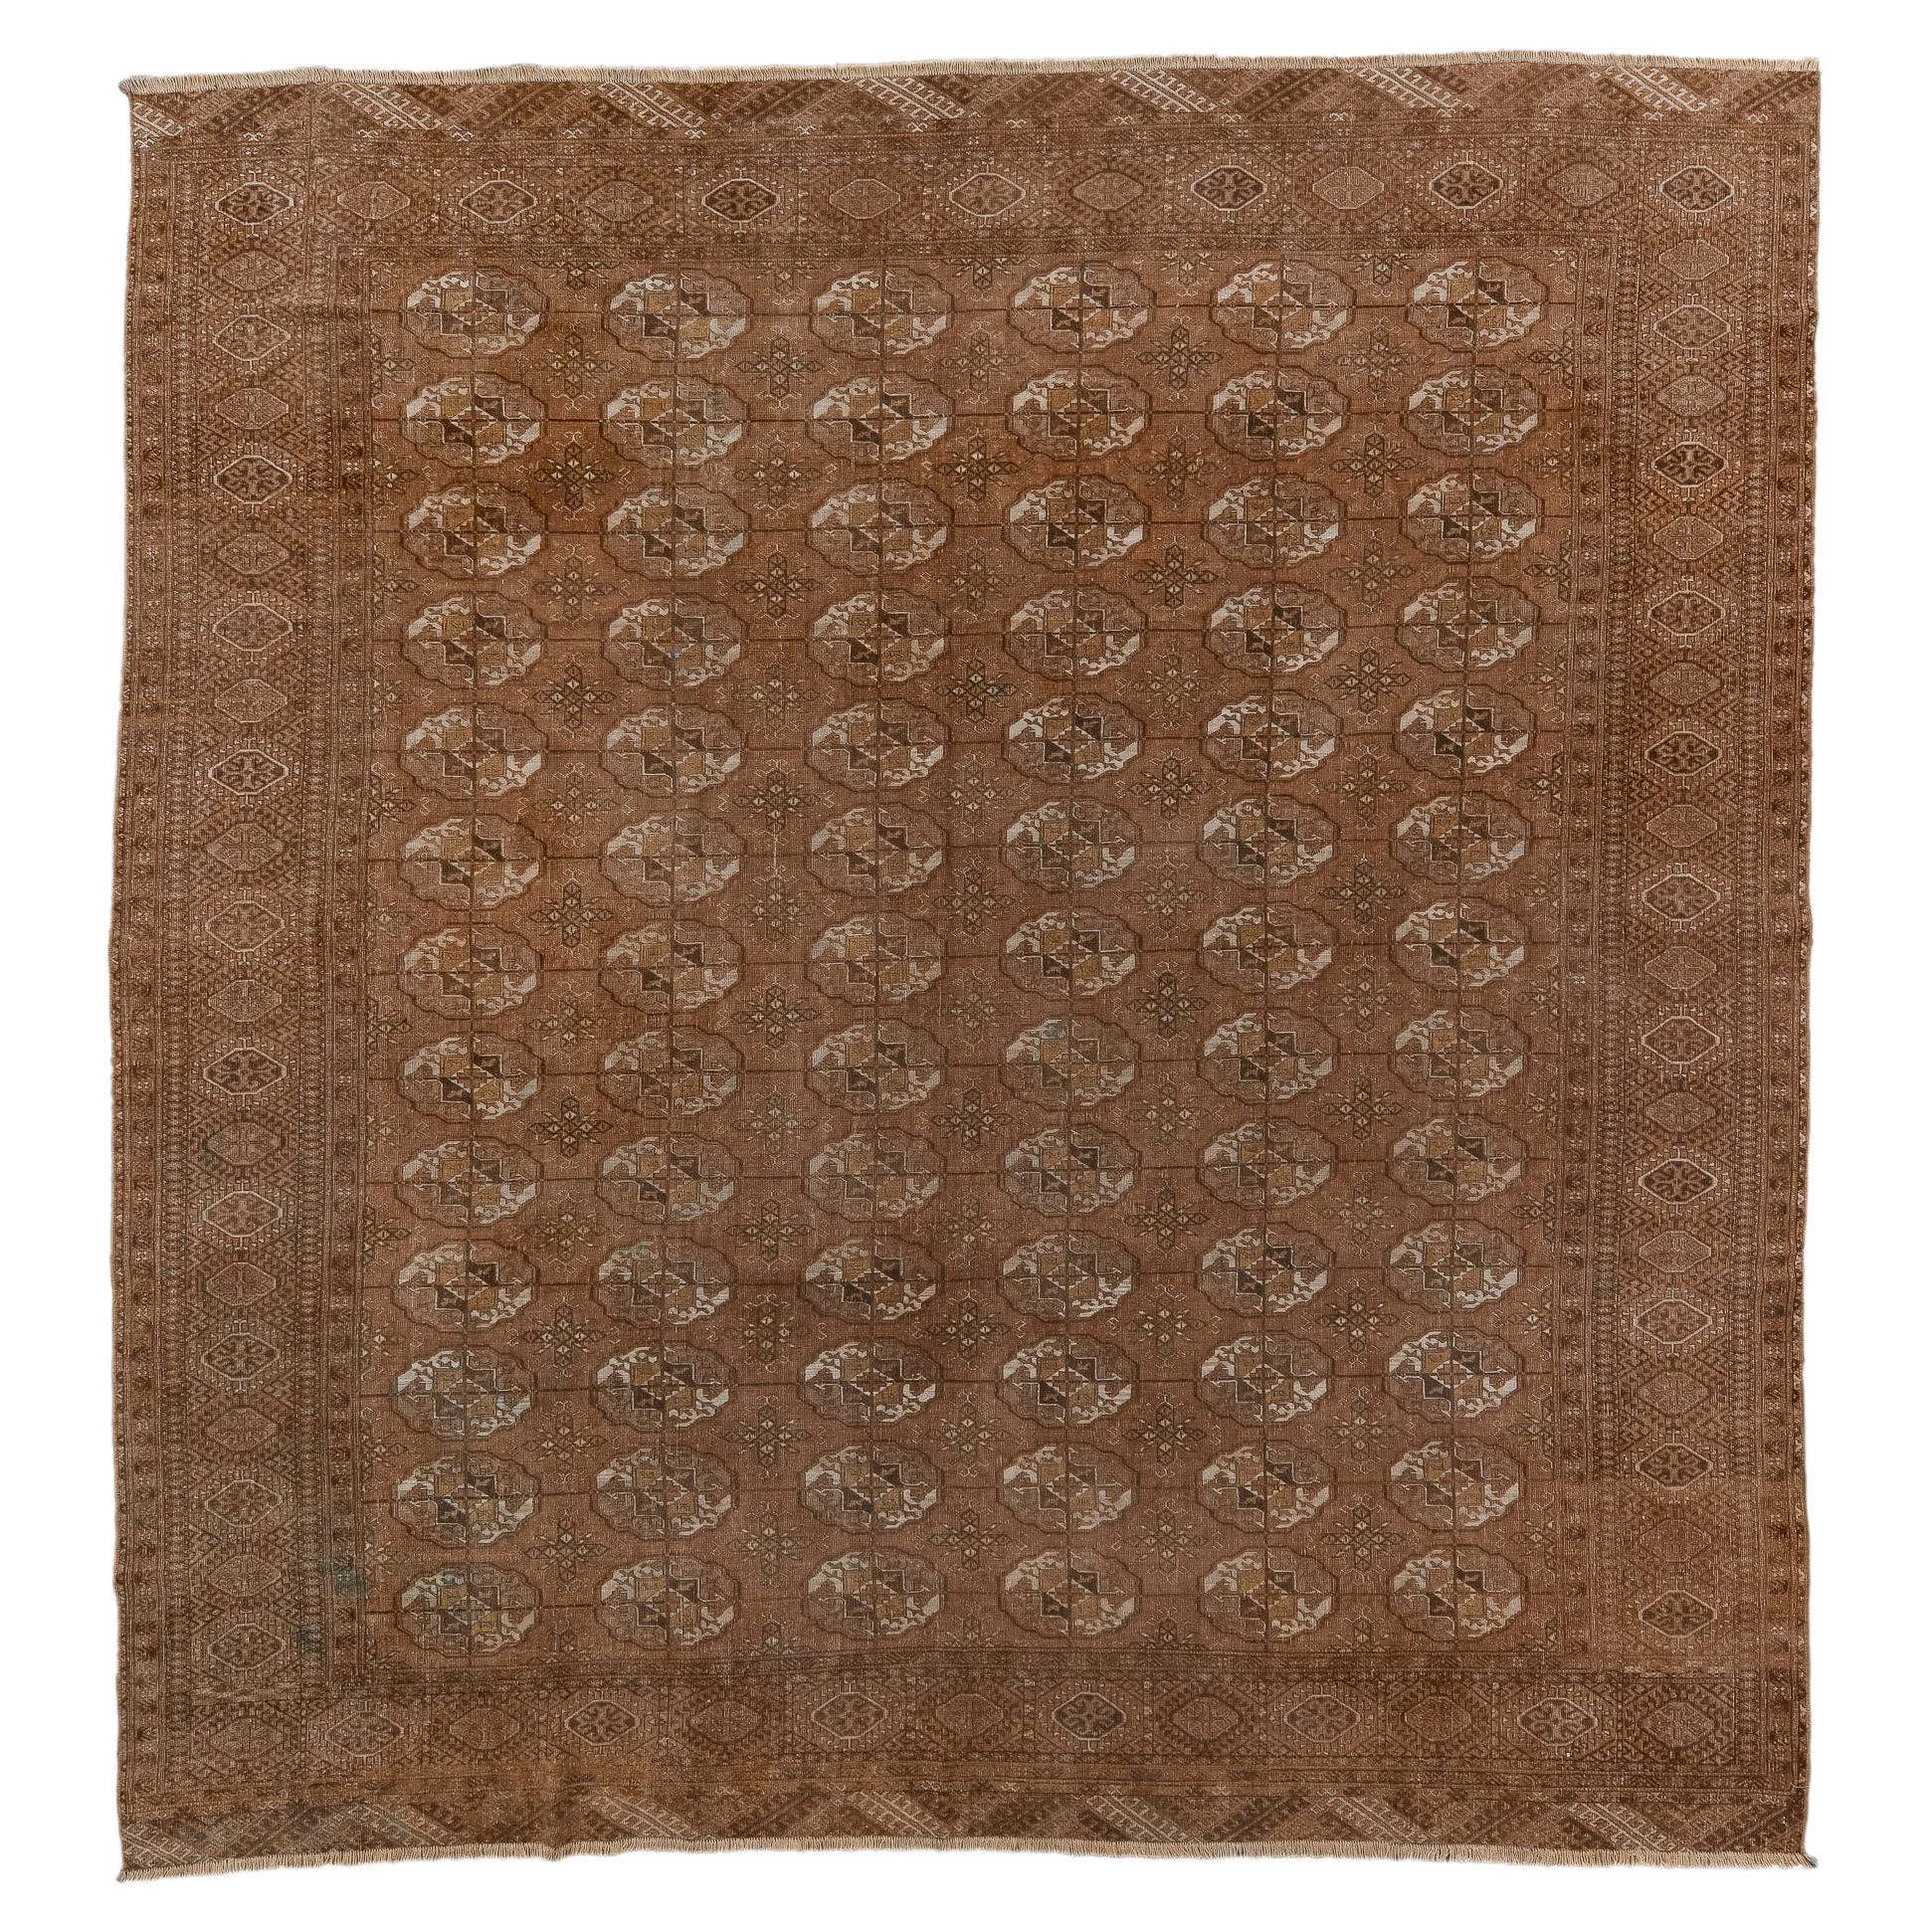 Antique Afghan Rug with Rusty Red Field